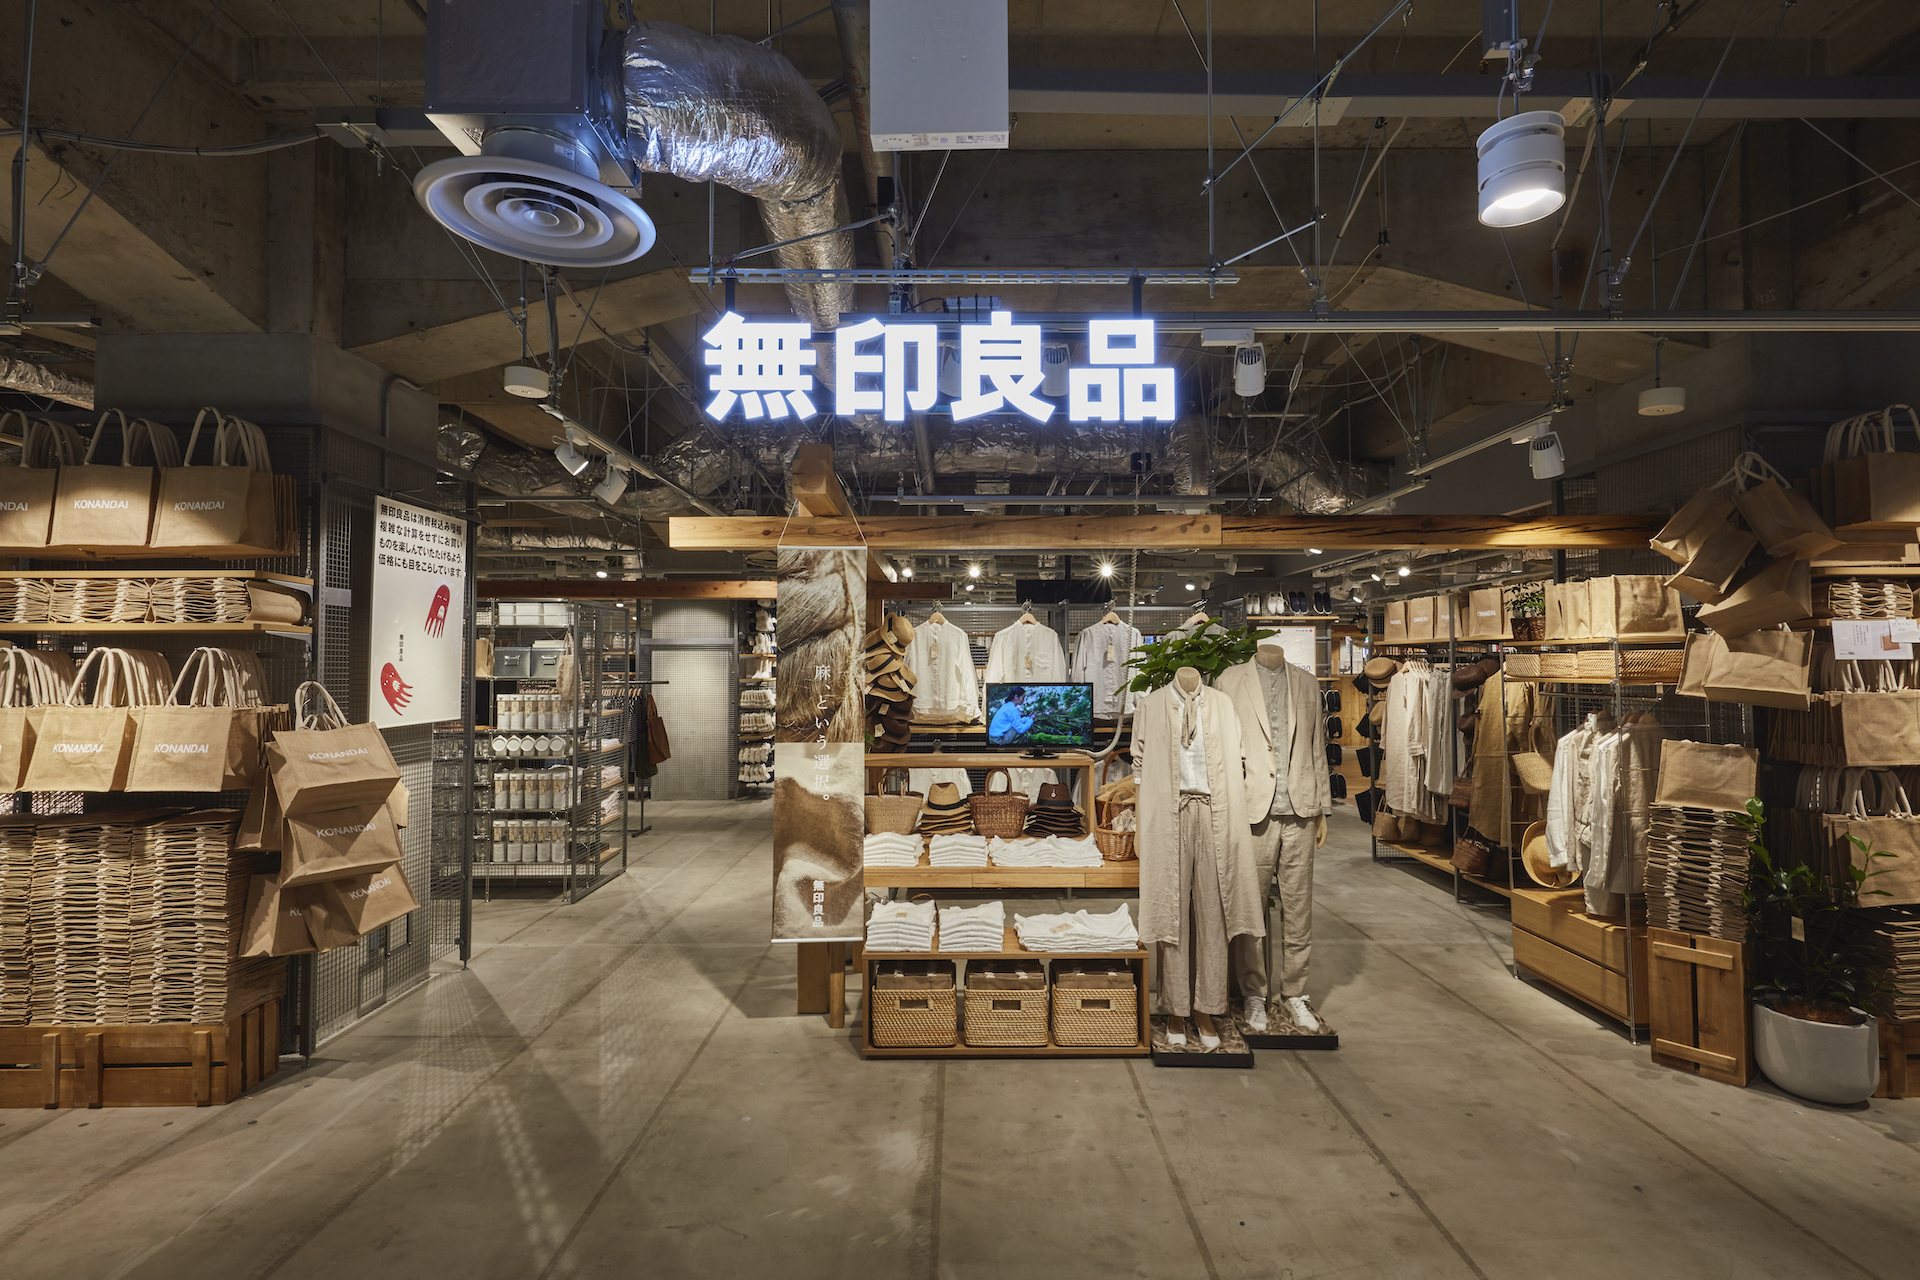 This New Muji In Yokohama Has A Huge Grocery Floor With Cooking Demonstrations